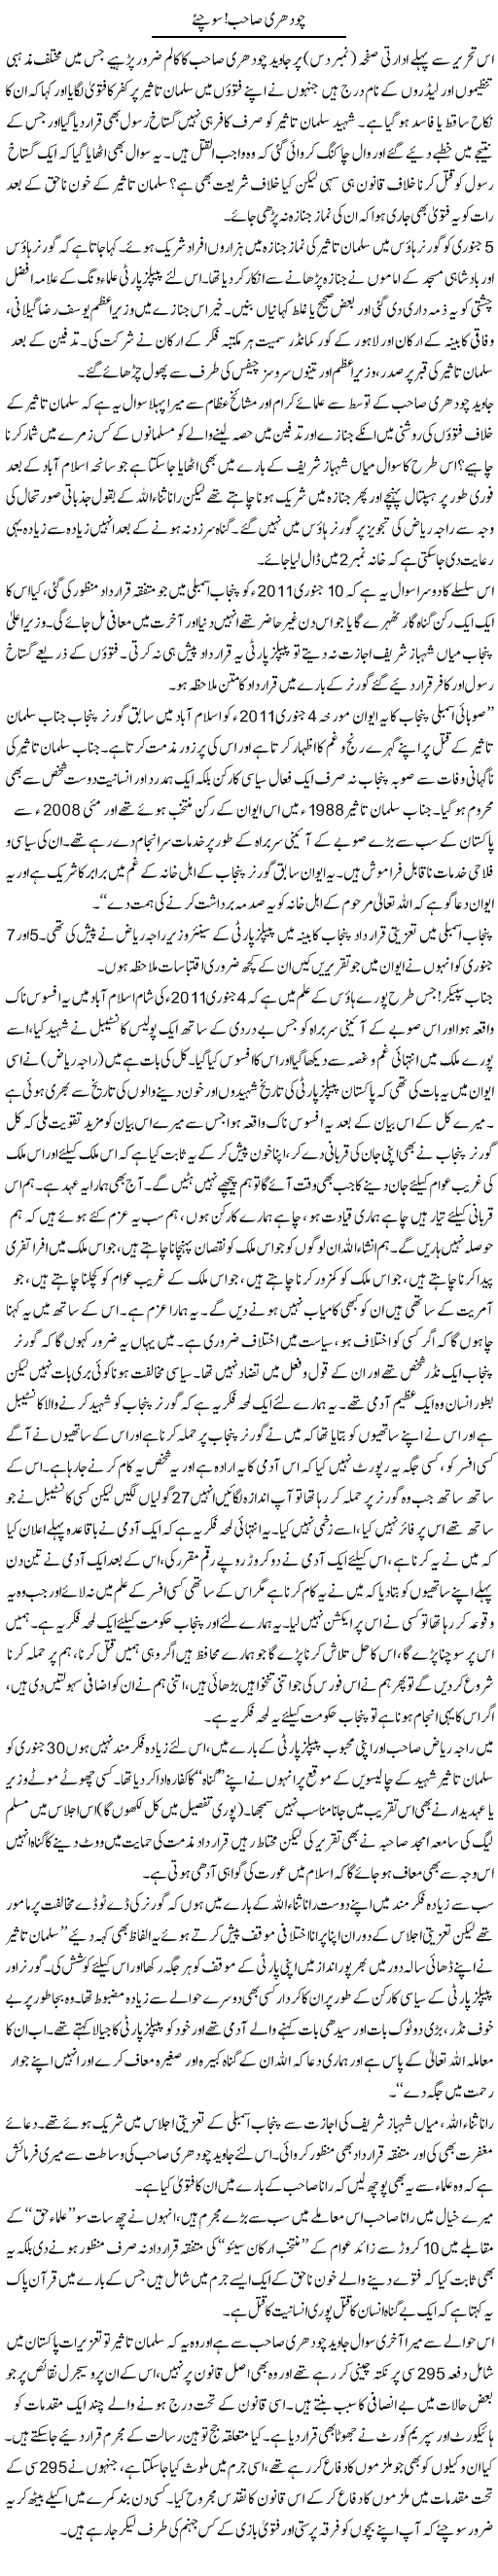 For Javed Chaudhry Express Column Abbas Athar 1 February 2011